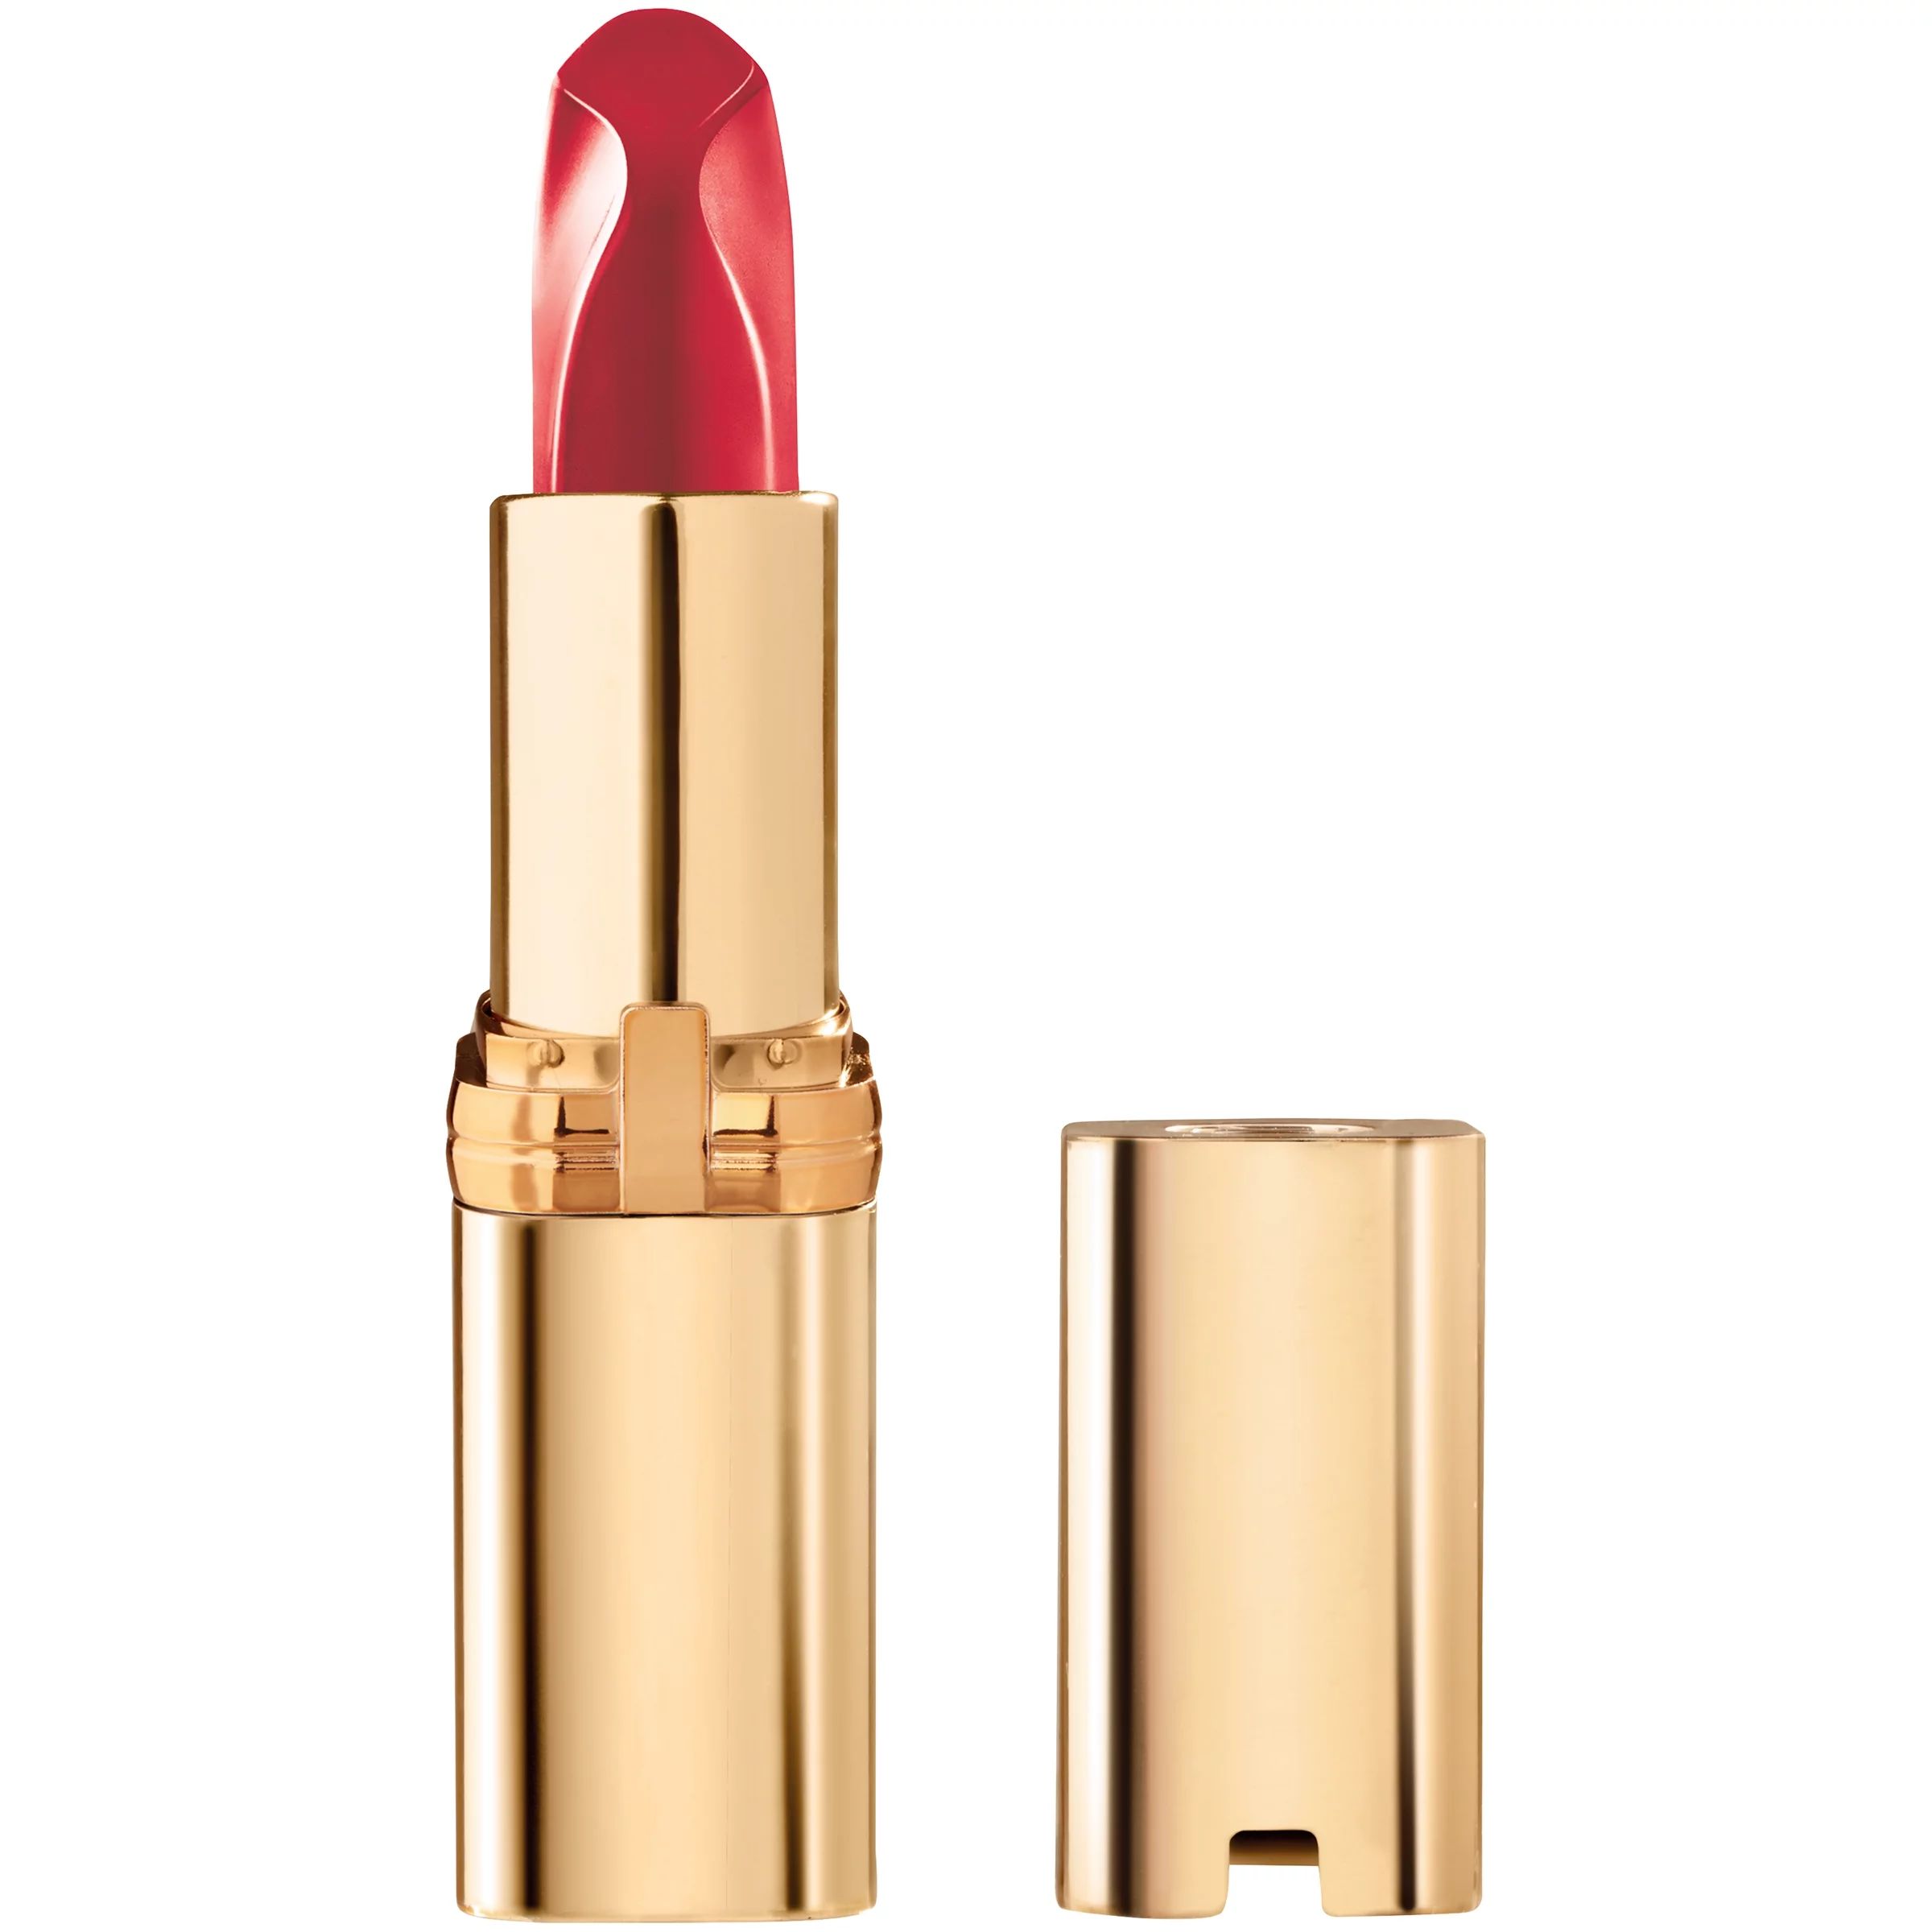 L'Oreal Paris Colour Riche Reds of Worth Satin Lipstick with Intense Color, Successful Red, 0.13 ... | Walmart (US)